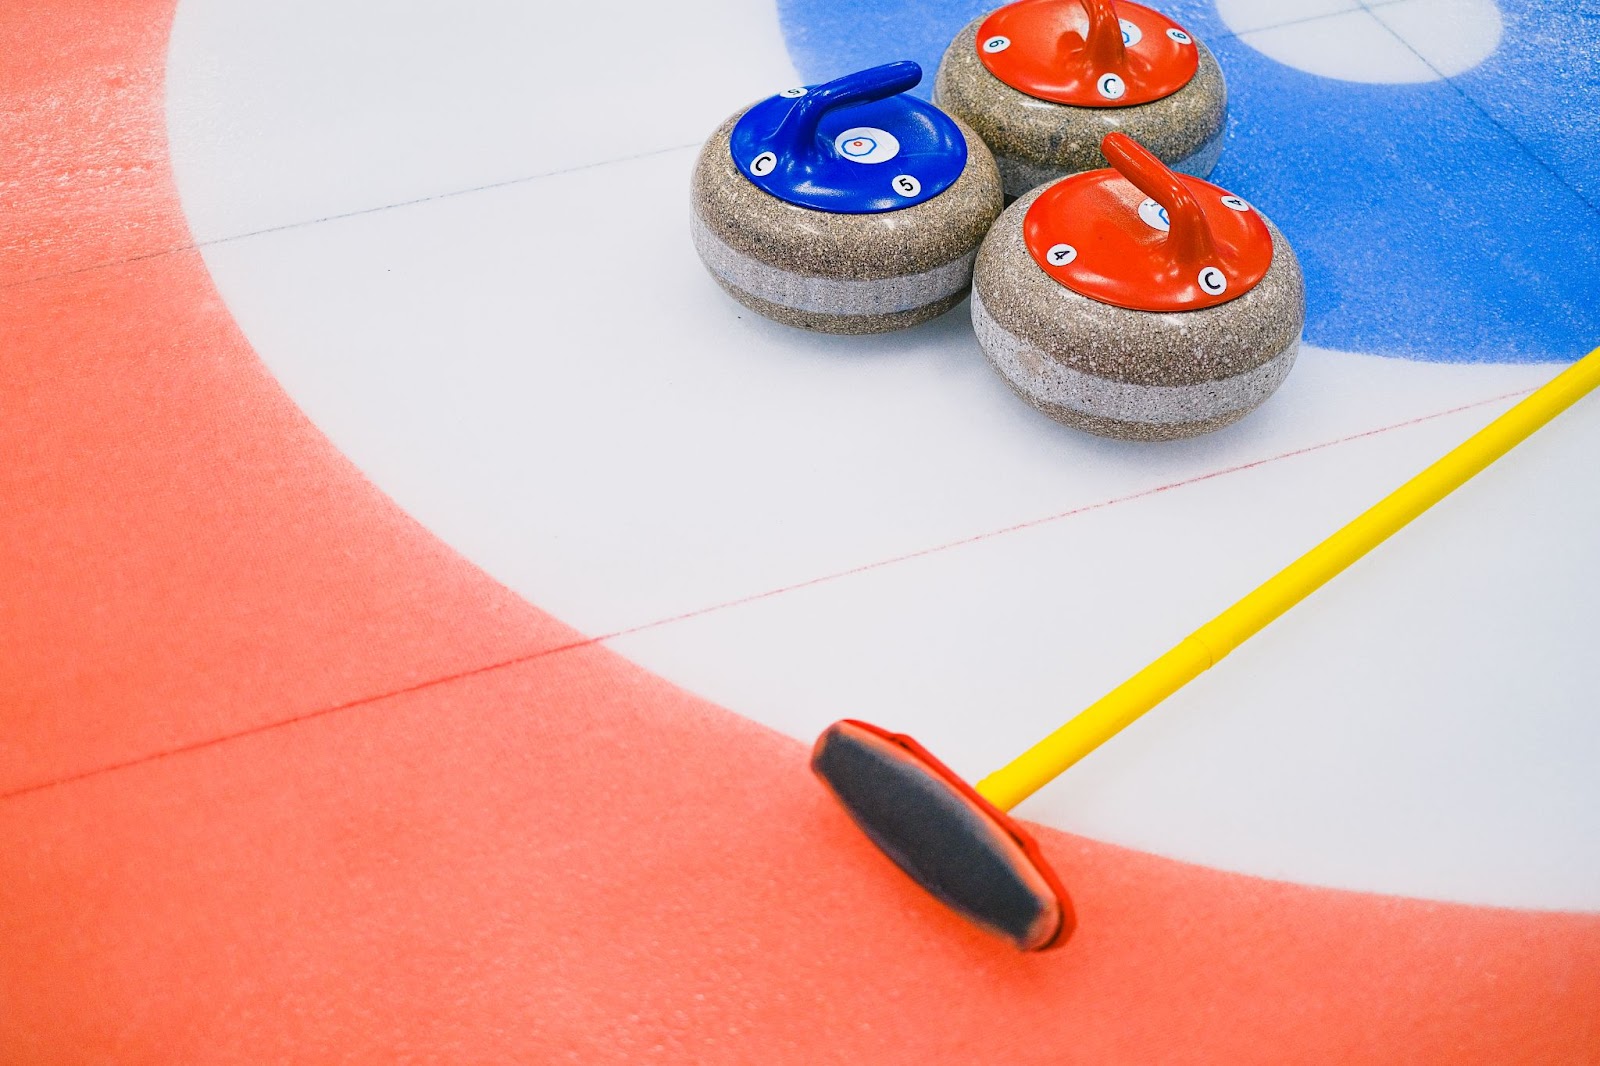 a curling broom with a yellow handle lying on the ice next to three rocks, two with red handles and one with a blue handle.